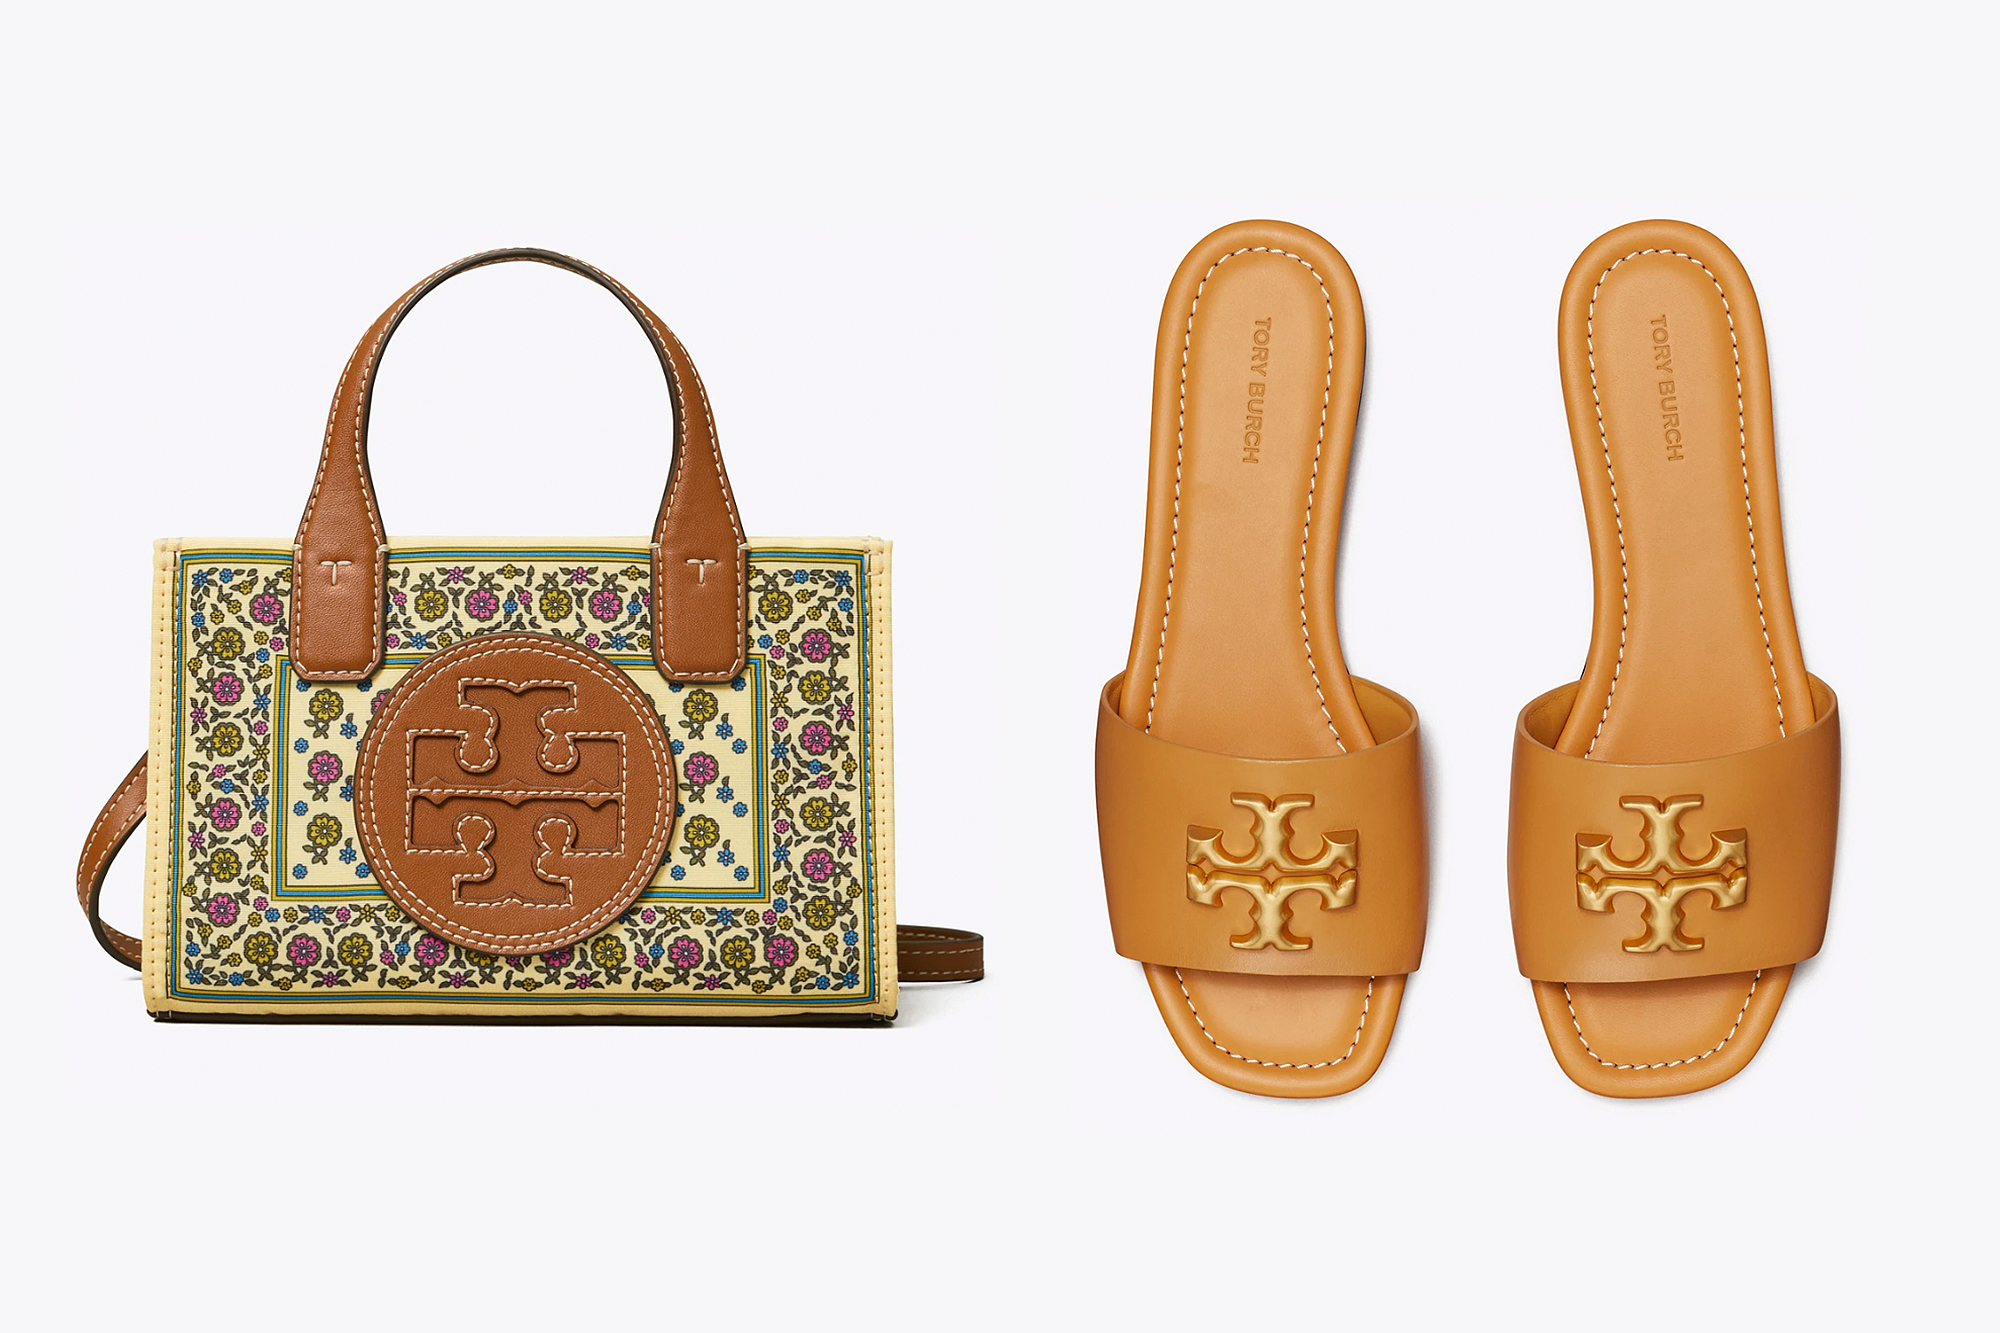 Help! I already have the Tory Burch small Flemming in black - want a  similar shoulder bag for the summer but can't decide between these 3. The Kira  chevron was the most